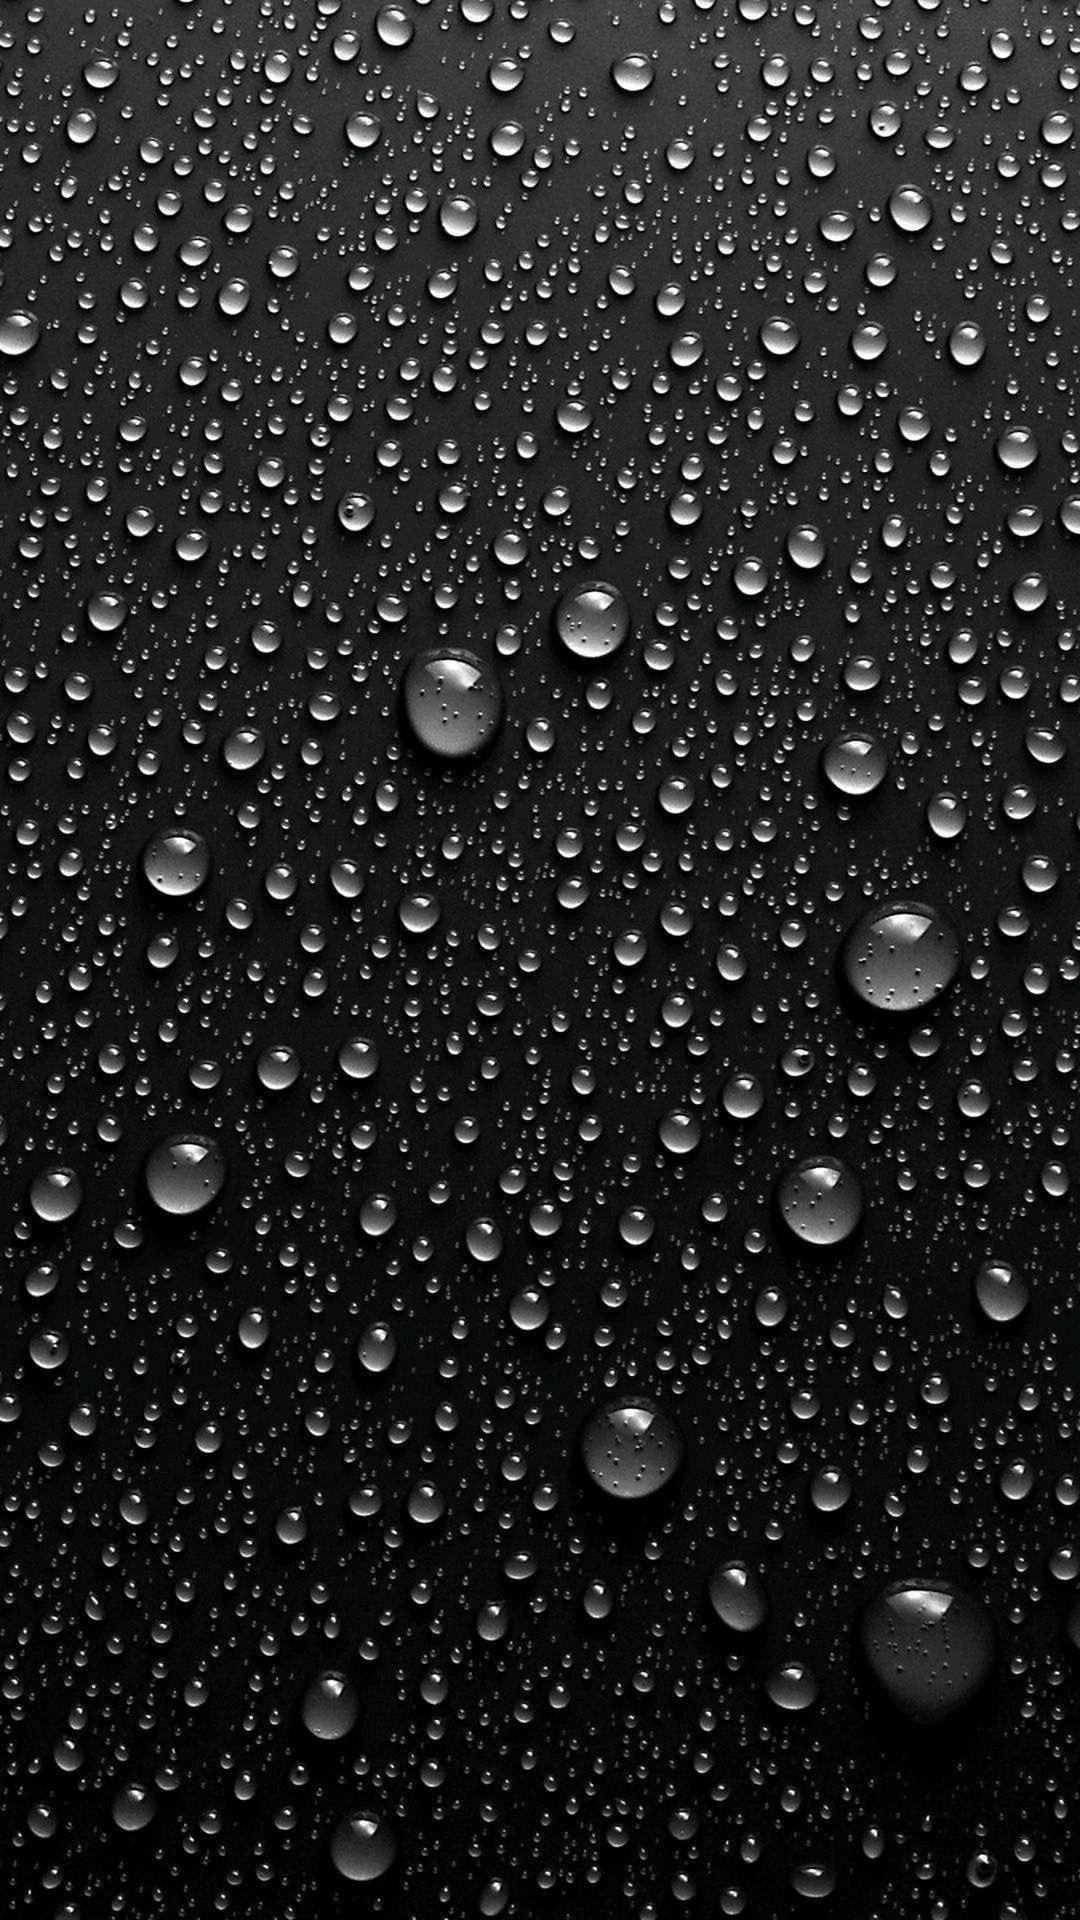 Black Iphone Droplets Picture